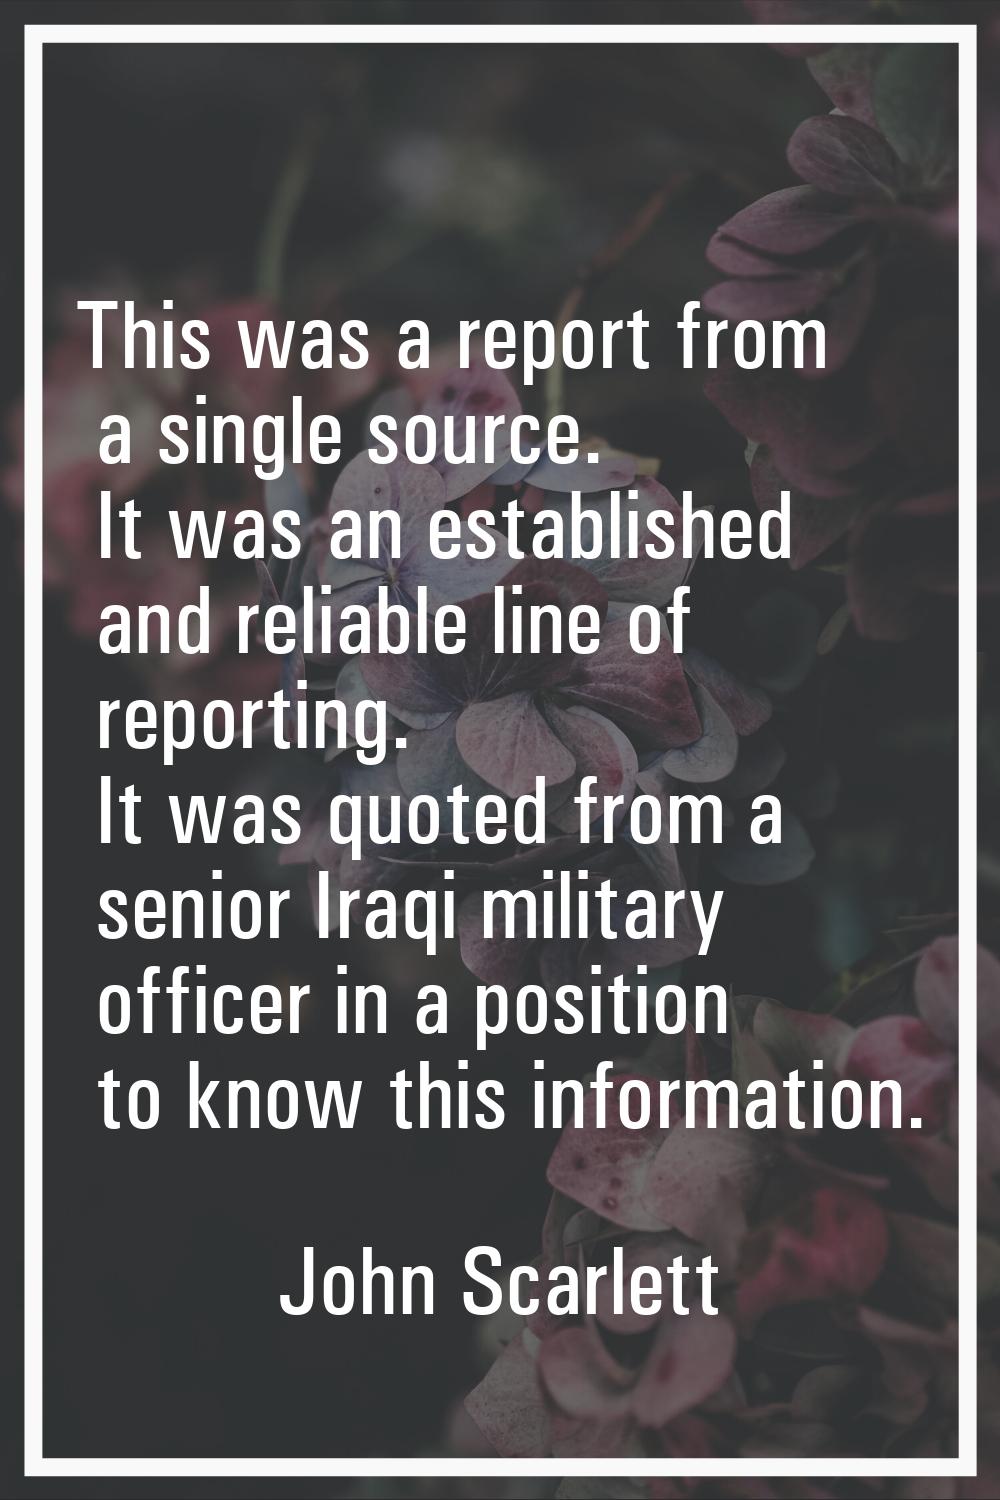 This was a report from a single source. It was an established and reliable line of reporting. It wa